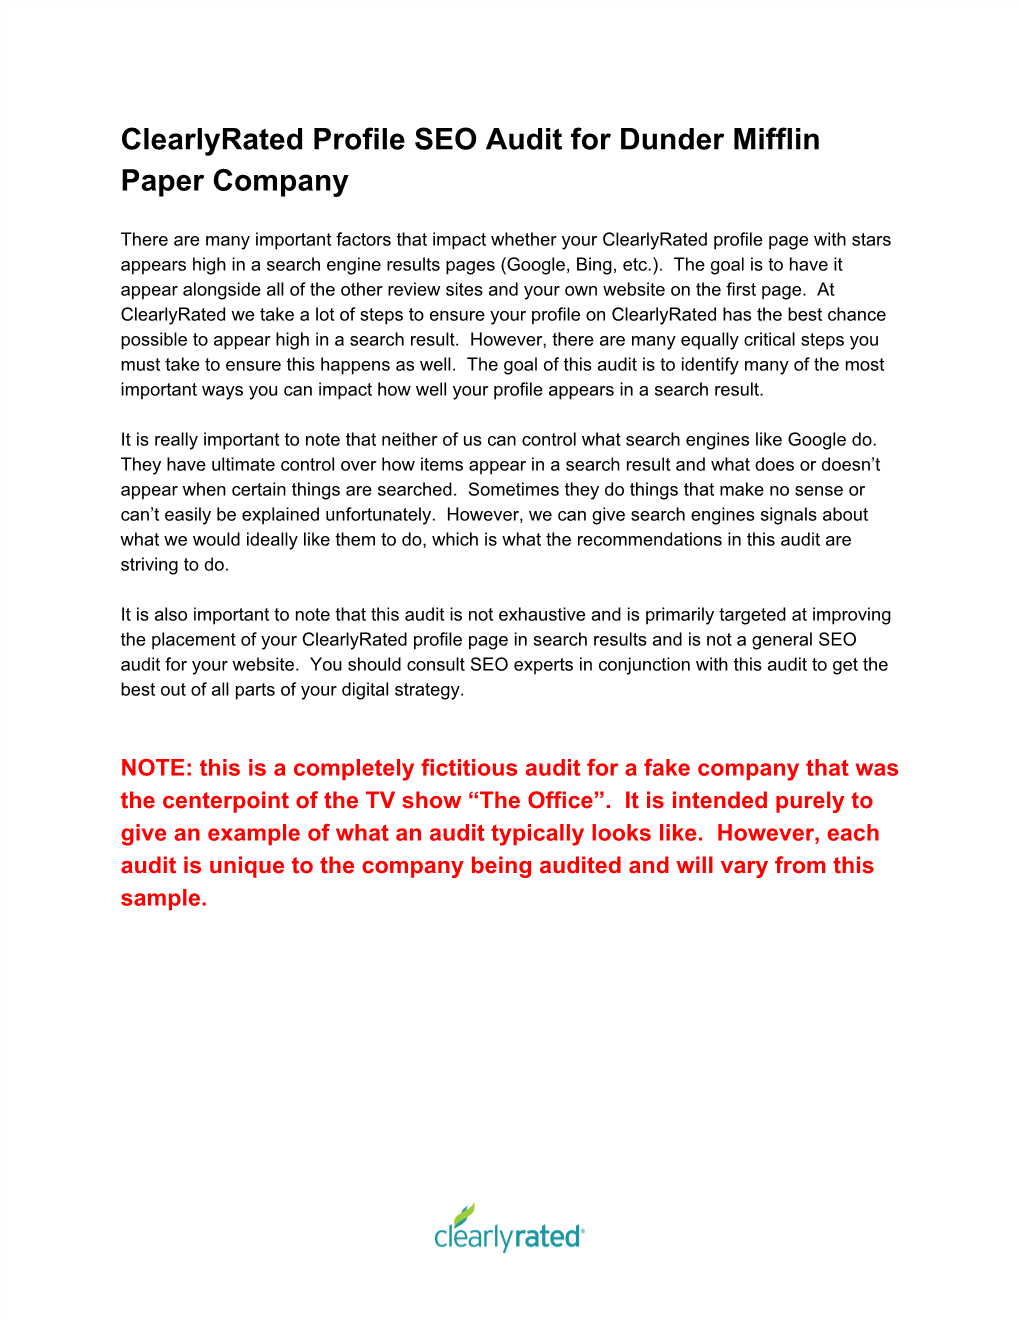 Clearlyrated Profile SEO Audit for Dunder Mifflin Paper Company